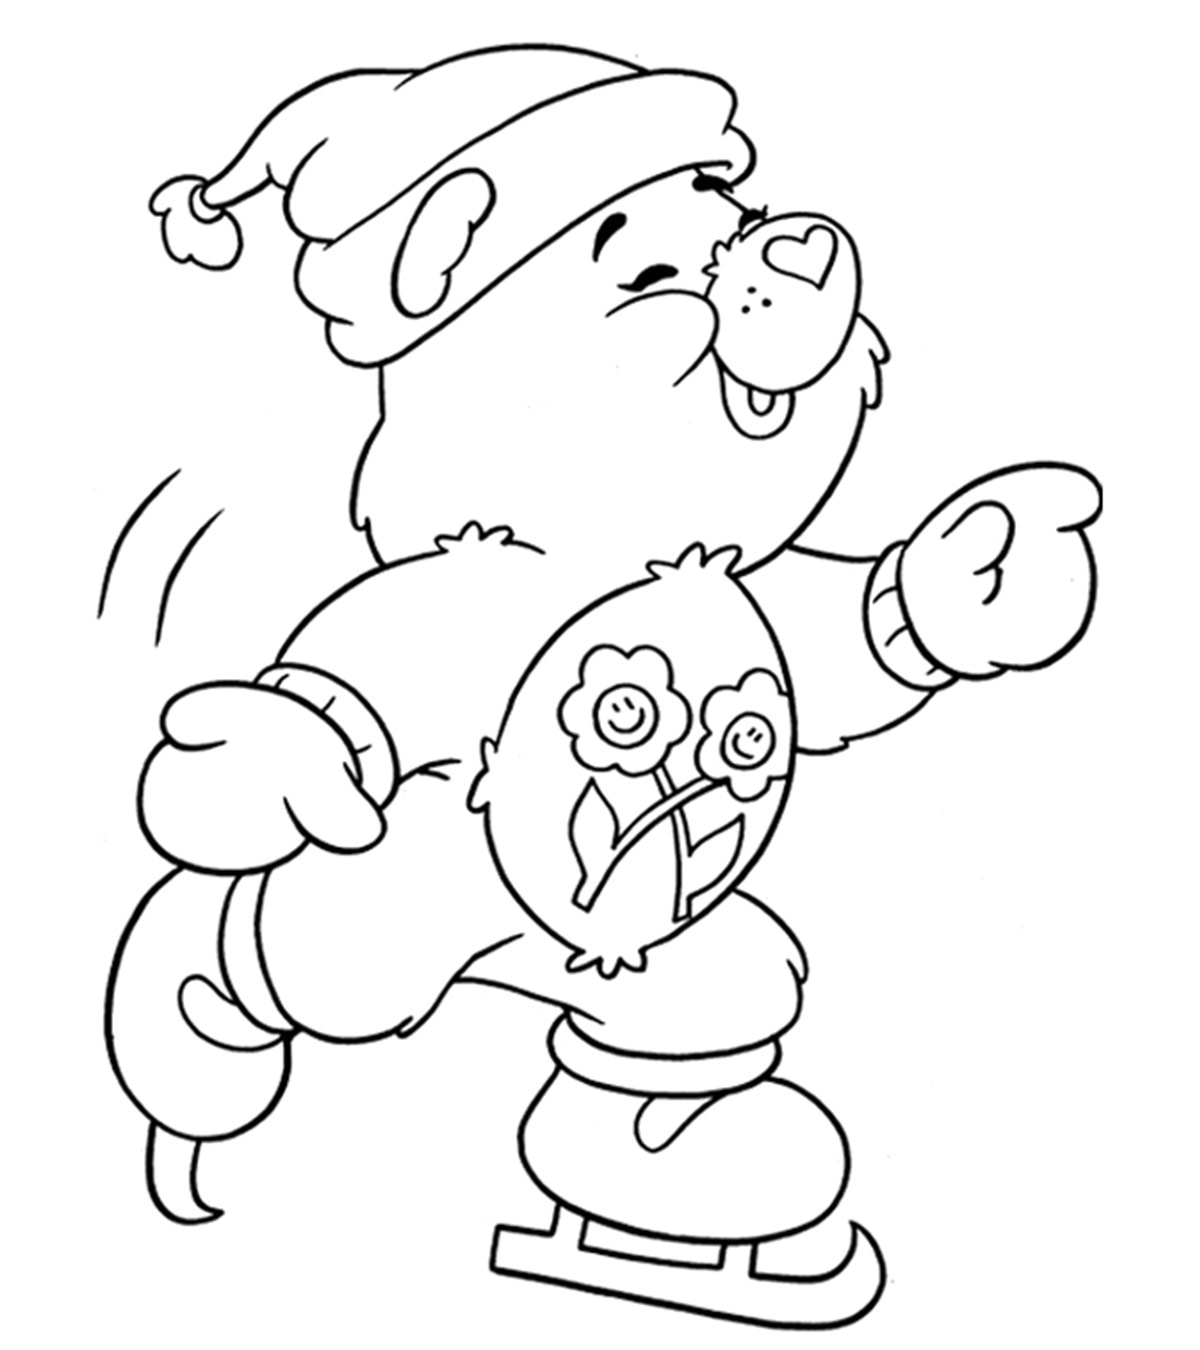 Top 20 Free Printable Winter Coloring Pages Online   Coloring Home